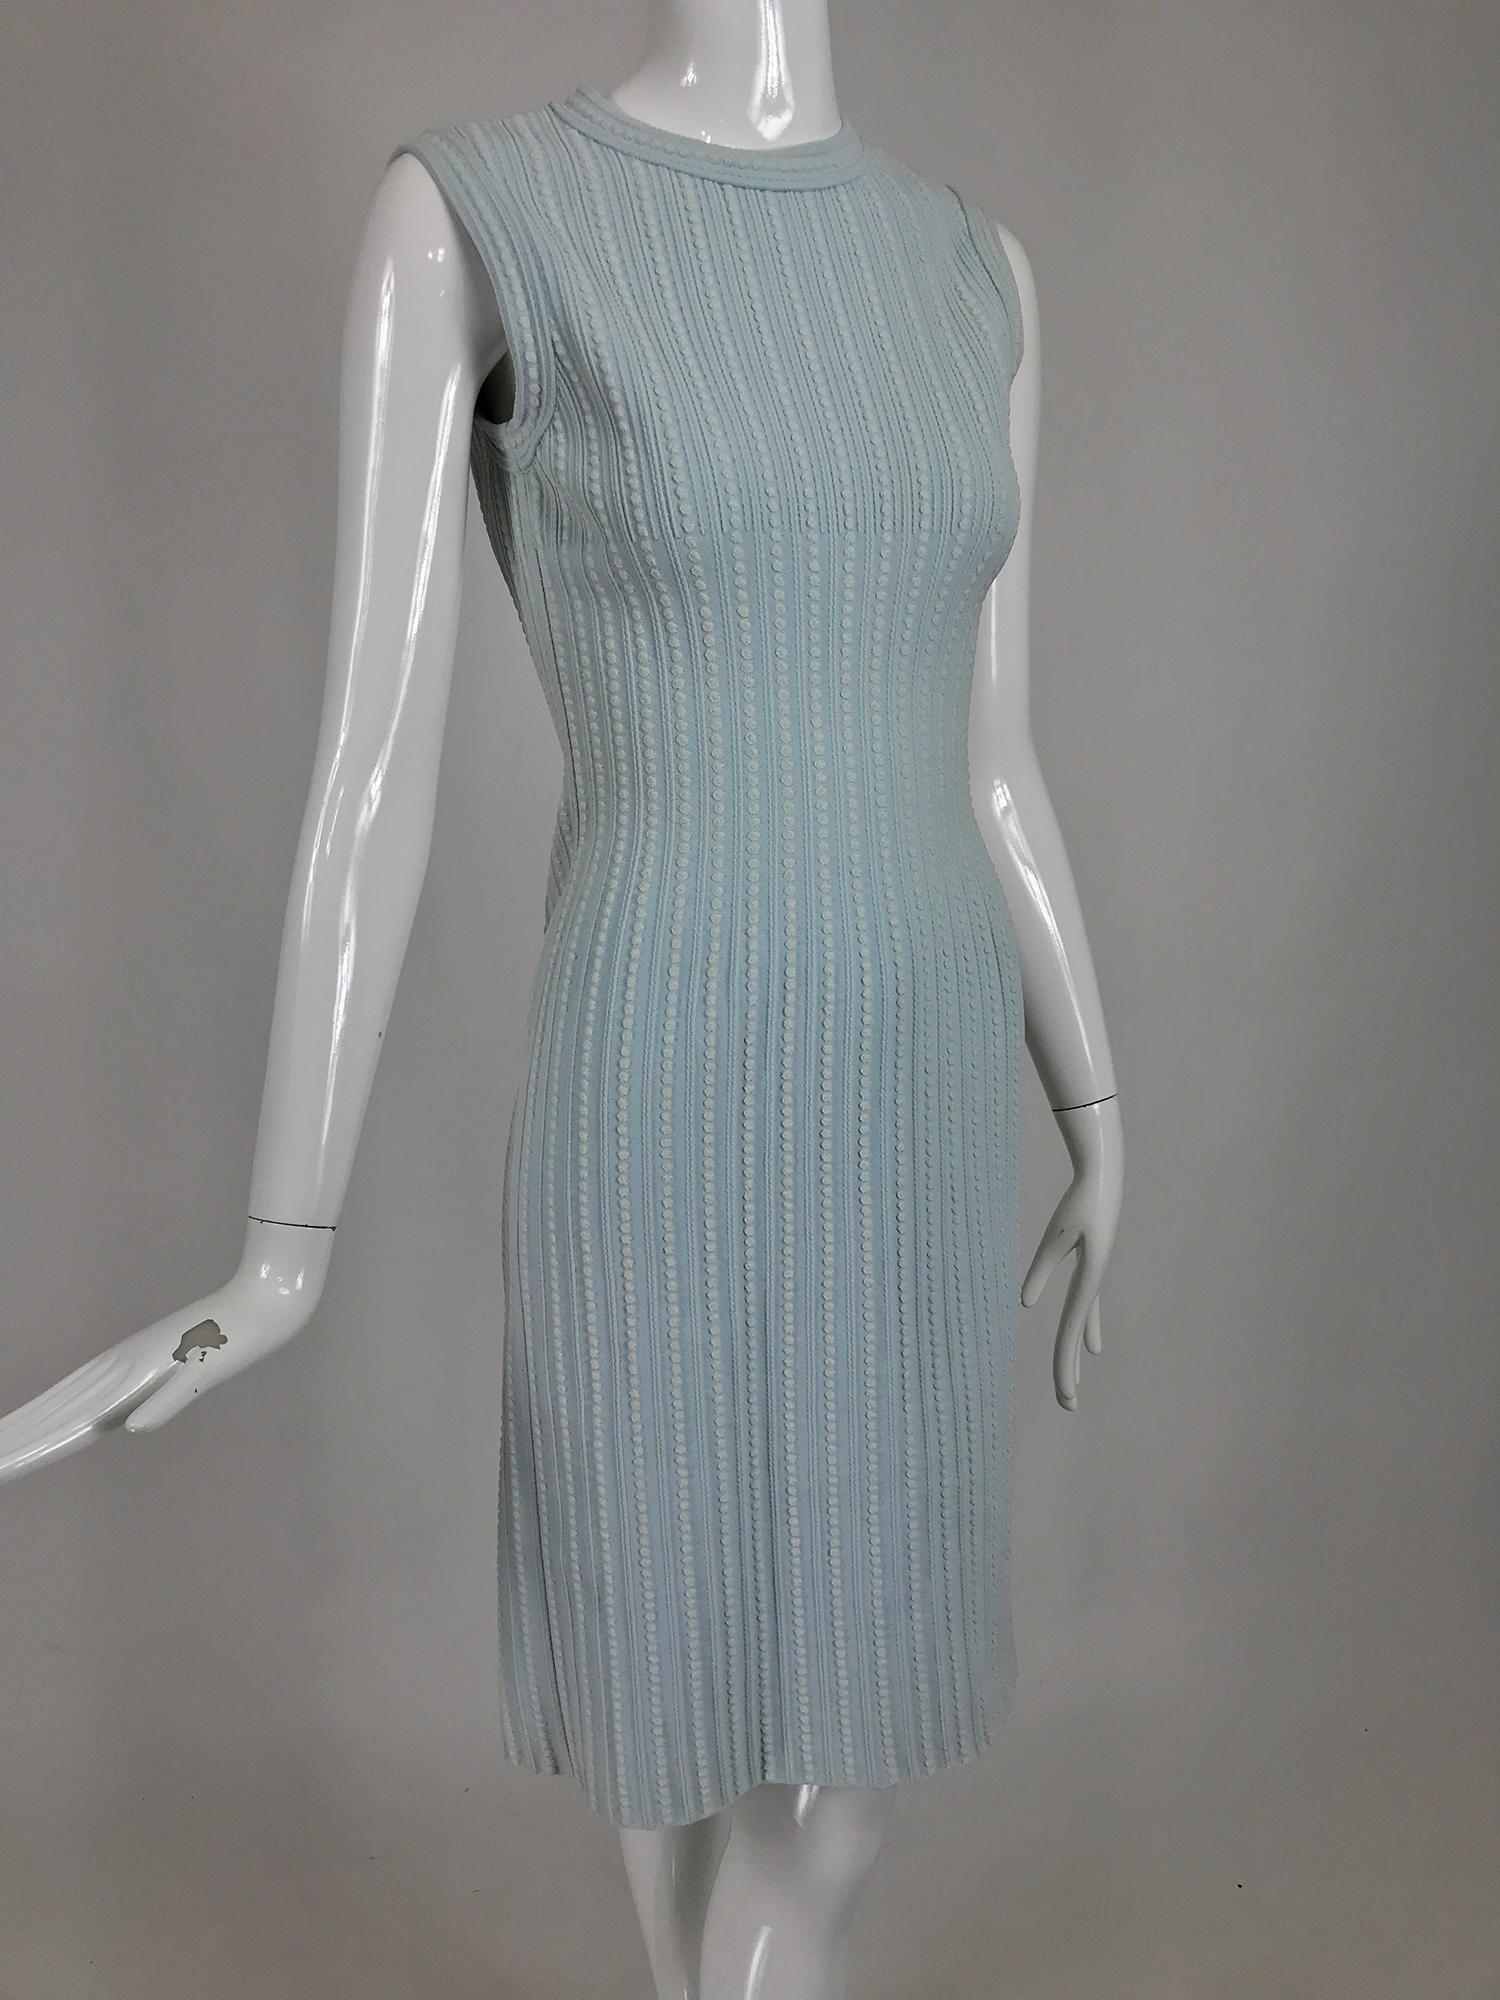 Azzedine Alaïa robins egg blue and cream fitted stretch body con dress. Raised textured stretch viscose sleeveless dress has a jewel neckline, the neck and arm openings are done in self bands of fabric. The dress is fitted and body hugging. Has the